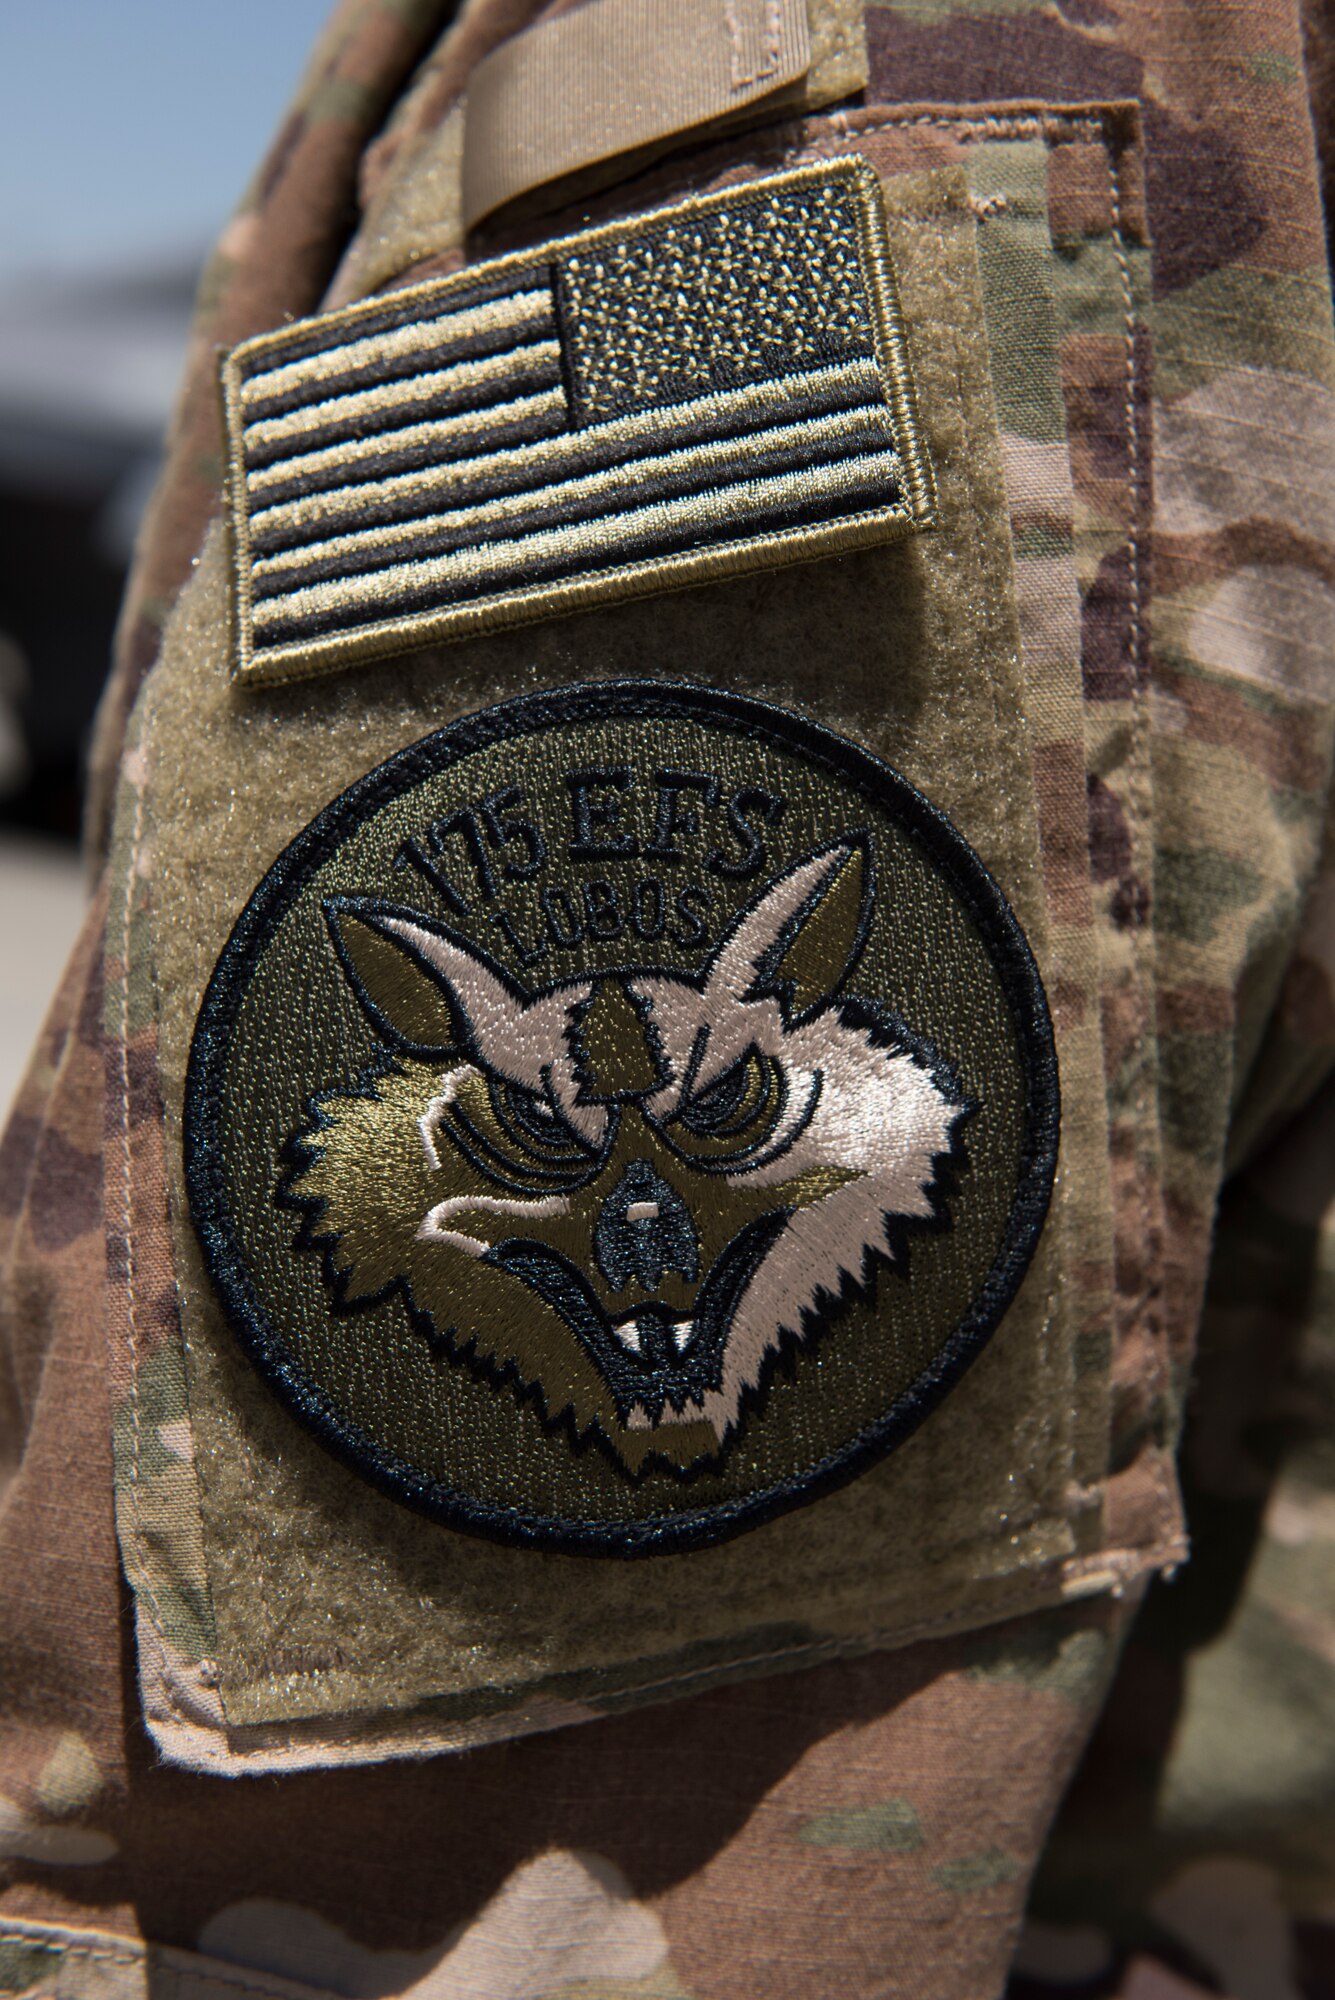 An airman from the 175th Expeditionary Fighter Squadron, South Dakota Air National Guard, wears the unit patch on his uniform while deployed to Bagram Airfield, Afghanistan, August 5, 2018. The 175th EFS are deployed from the 114th Fighter Wing, Joe Foss Field, Sioux Falls, in support of combat operations in Afghanistan. (U.S. Air Force photo by Tech. Sgt. Eugene Crist)